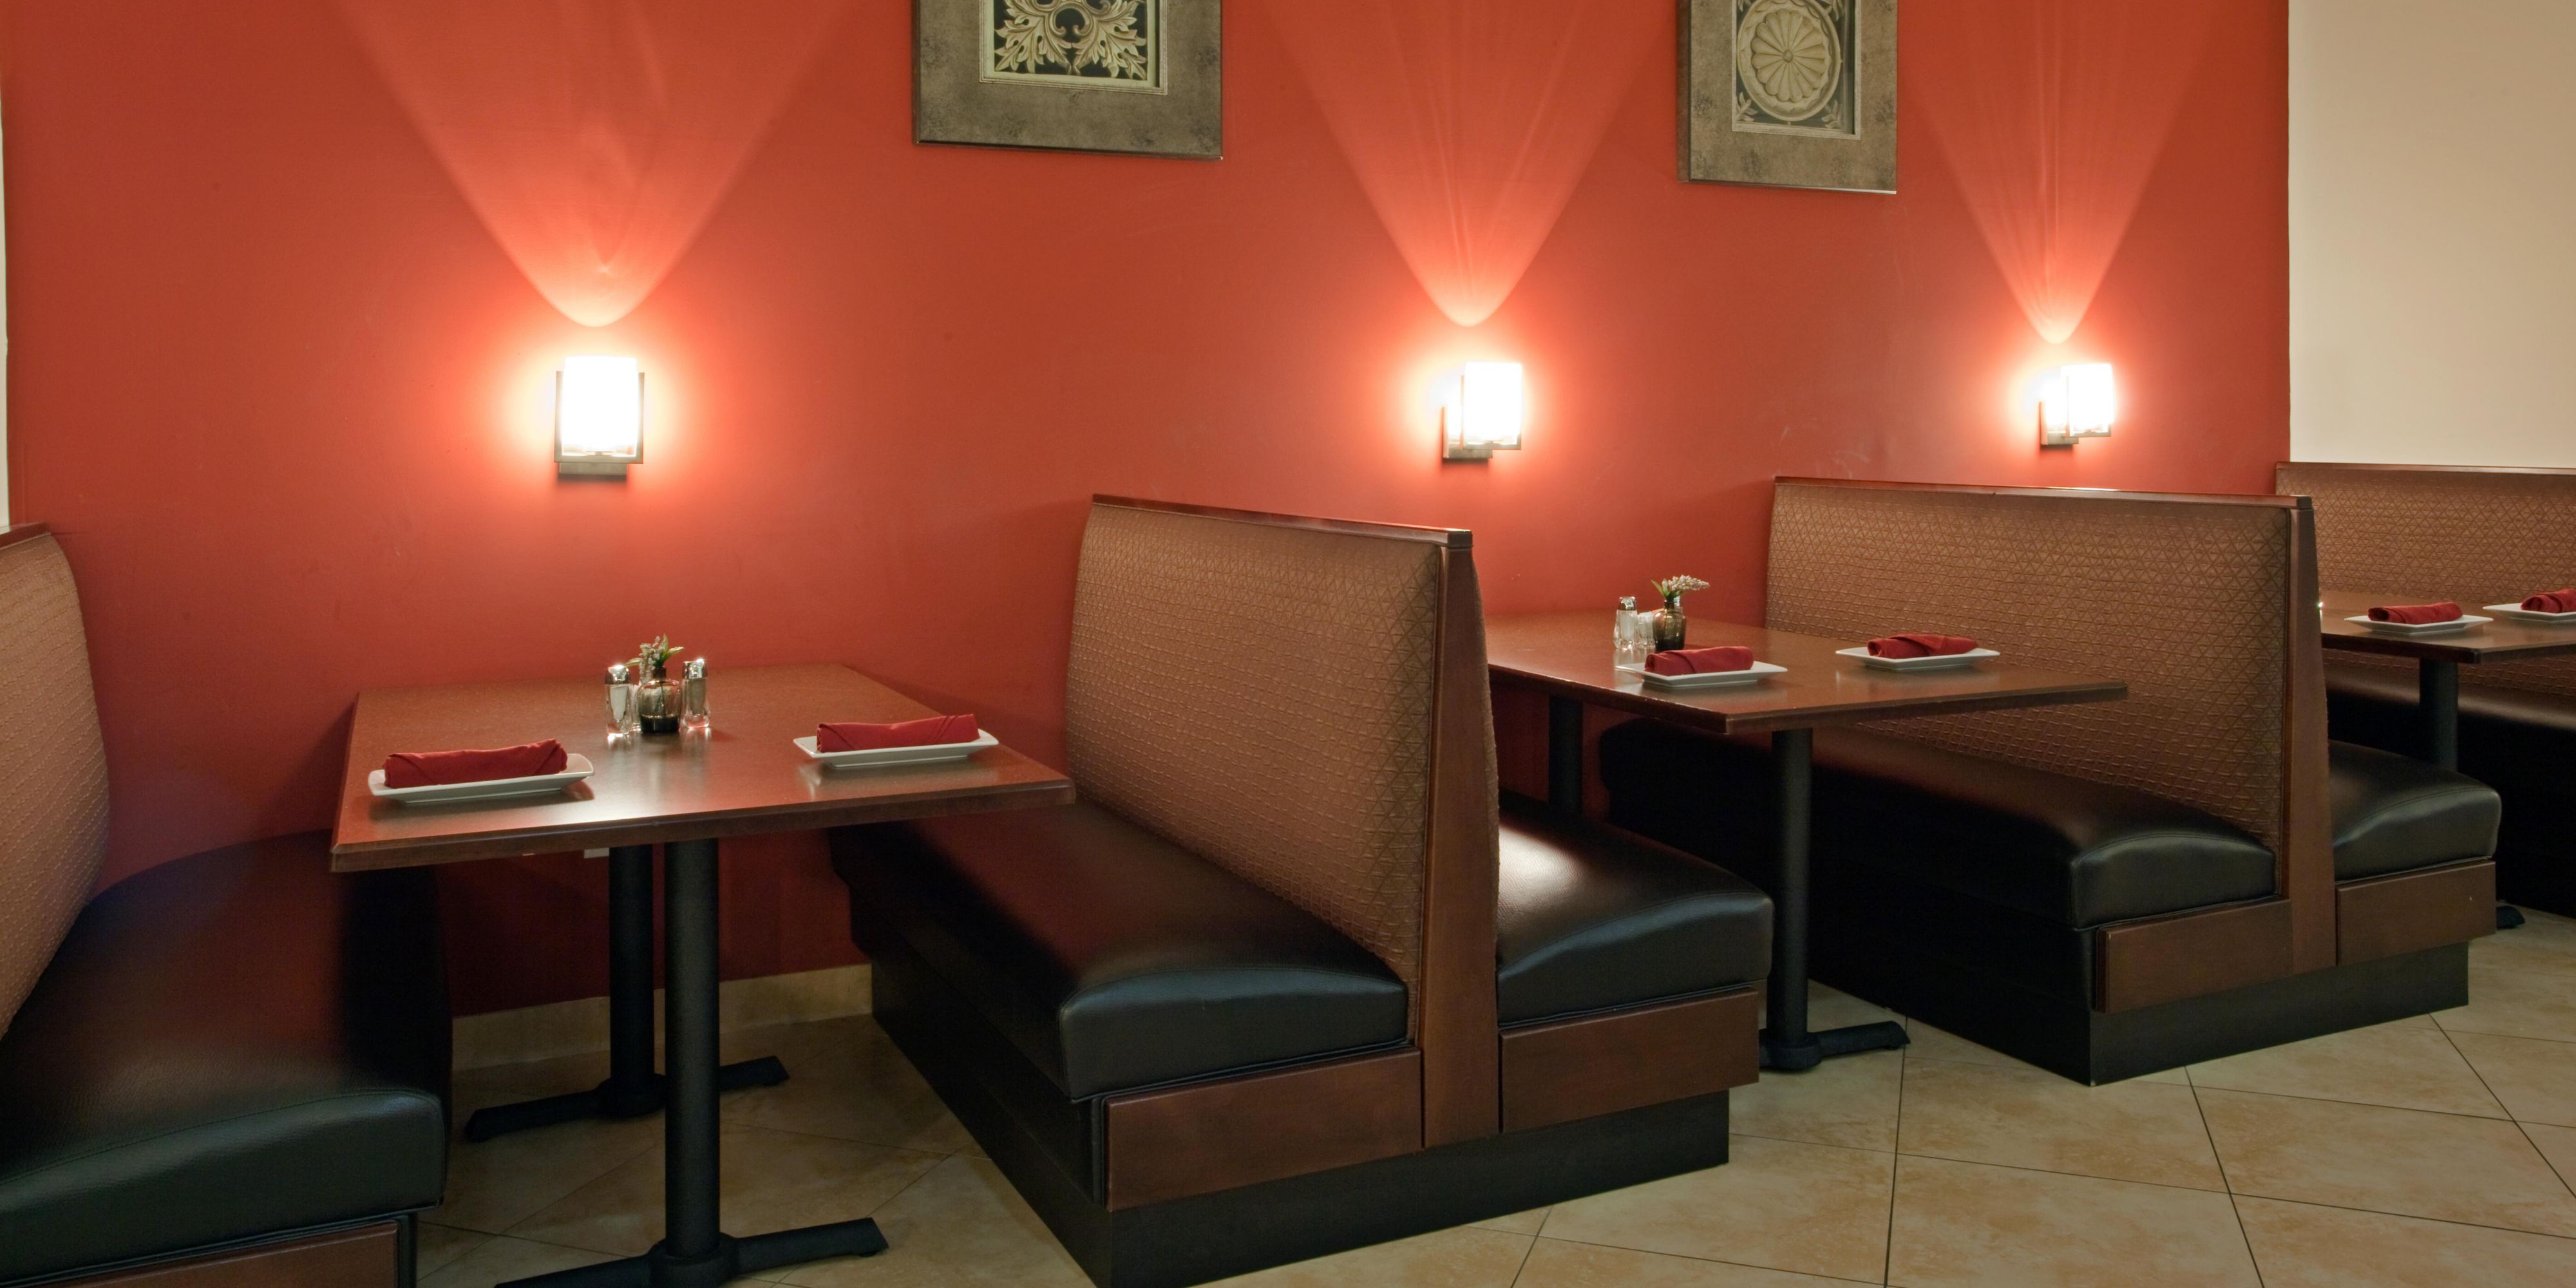 Booth Seating Available for Both Breakfast and Dinner